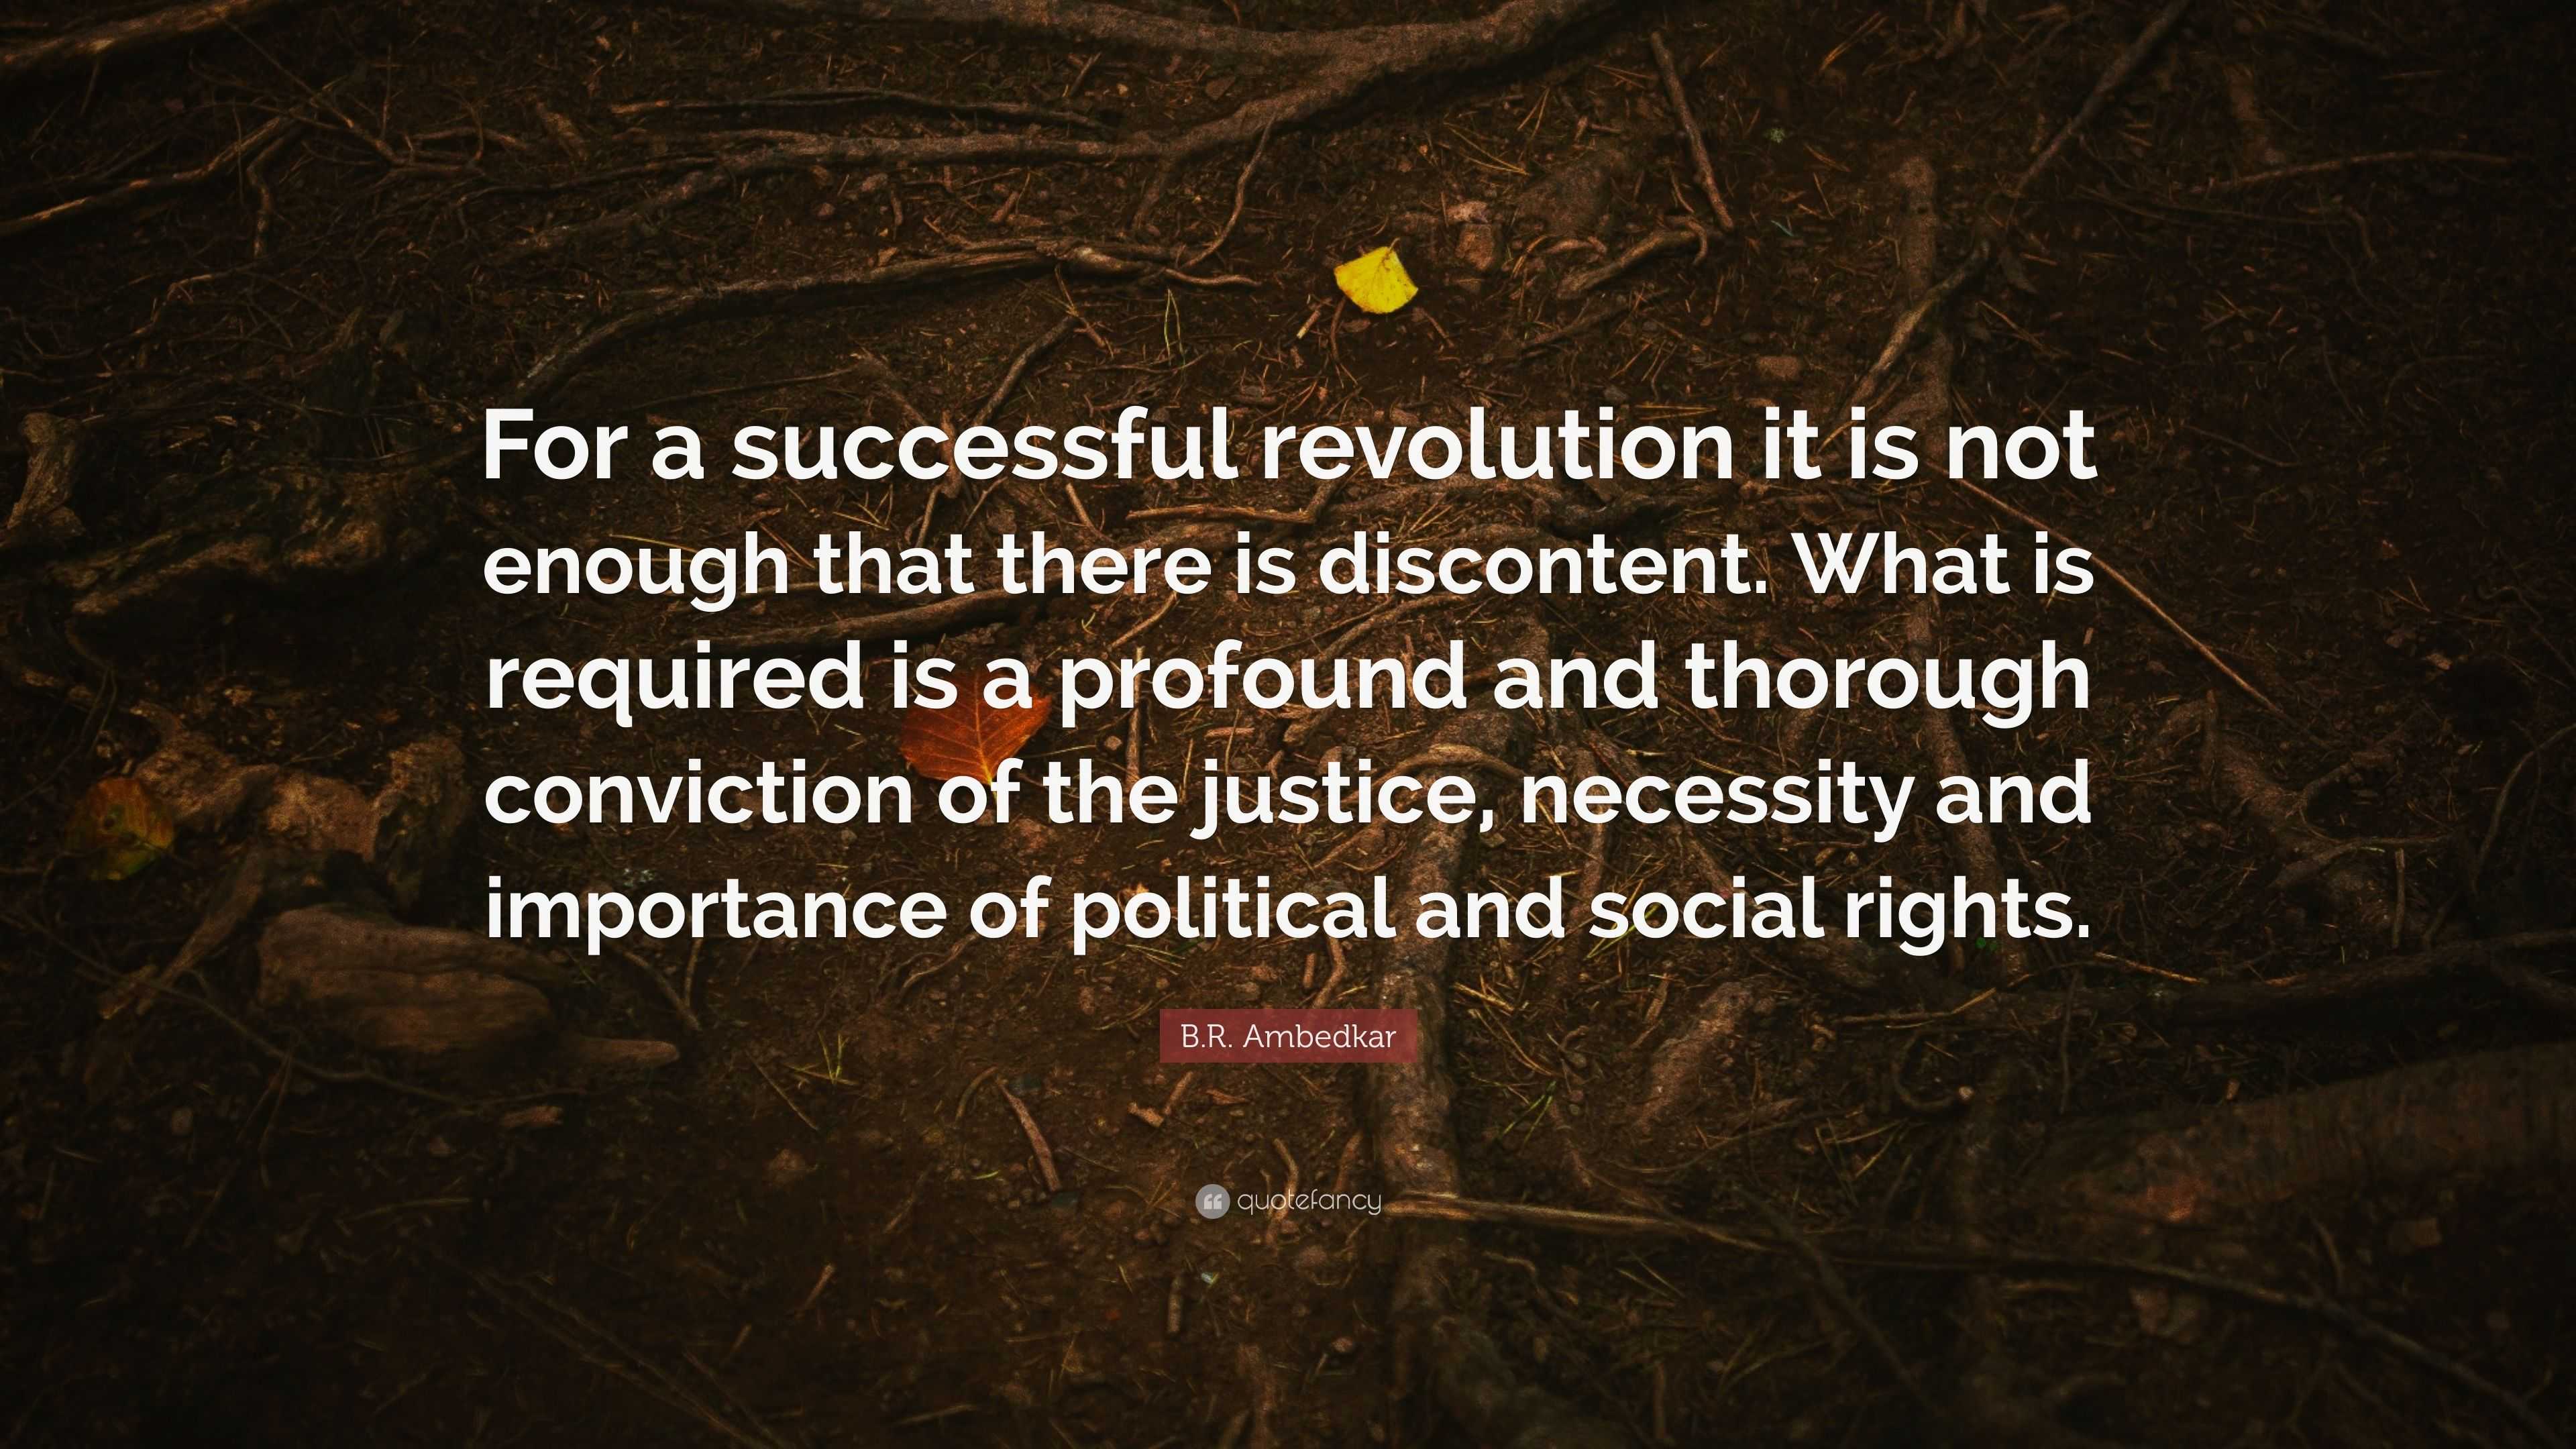 Prefuse 73 quote: It takes a community to start a revolution.